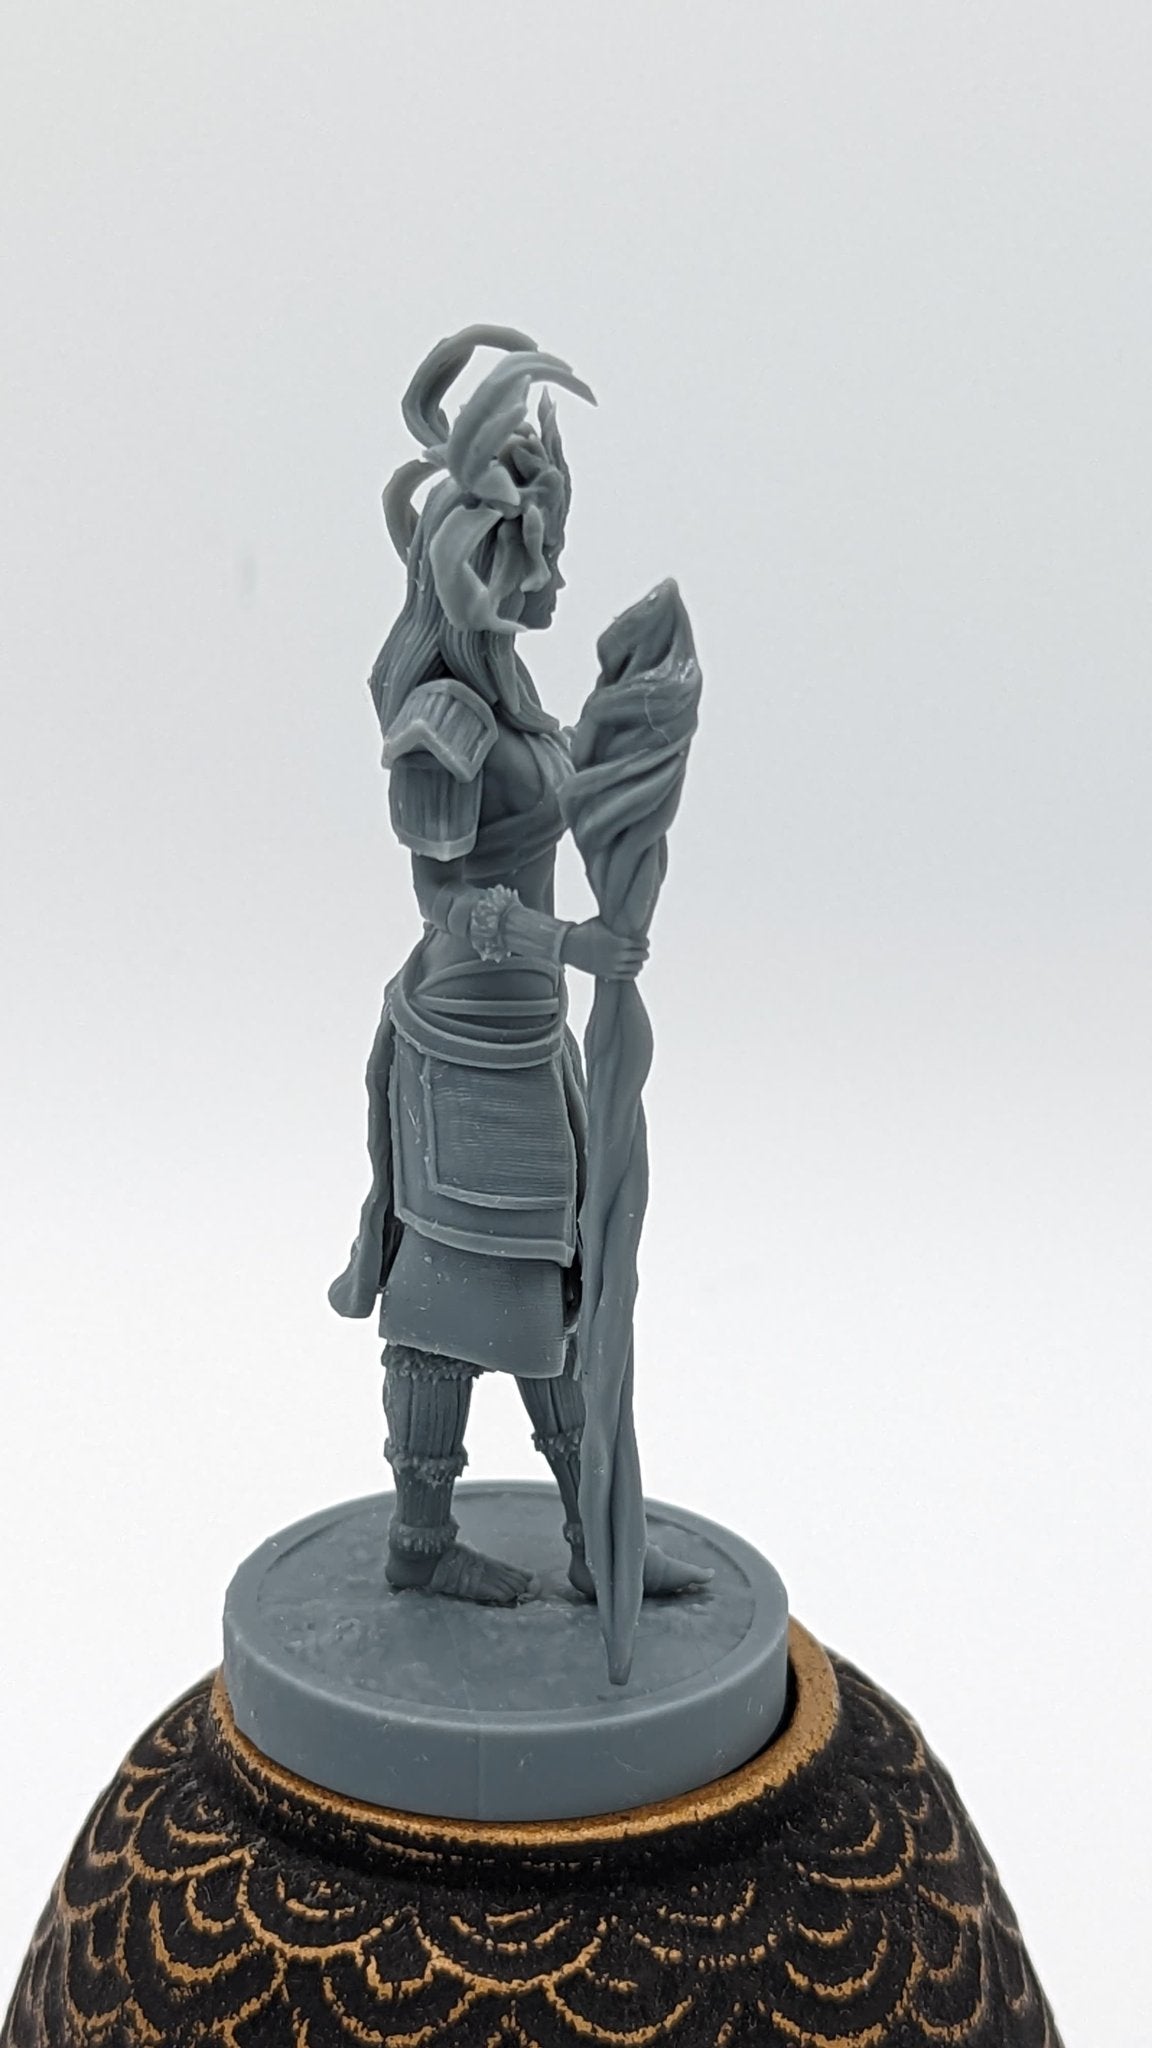 Freya 3d Printed miniature FanArt by Ravi Sampath Scaled Collectables Statues & Figurines